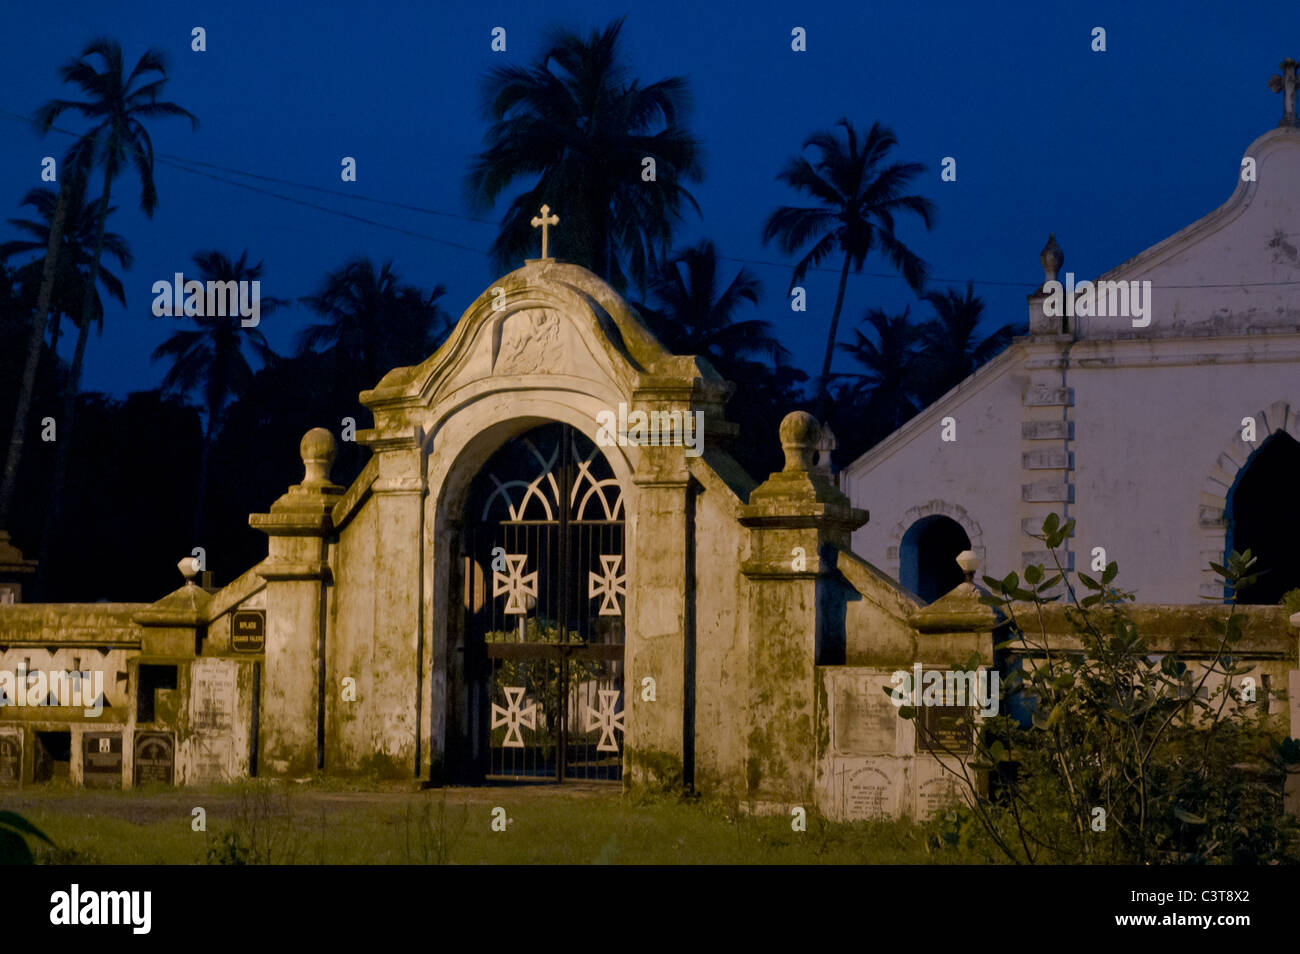 Portuguese colonial architecture in Goa, India. The front gate to a Roman Catholic church grounds. Stock Photo